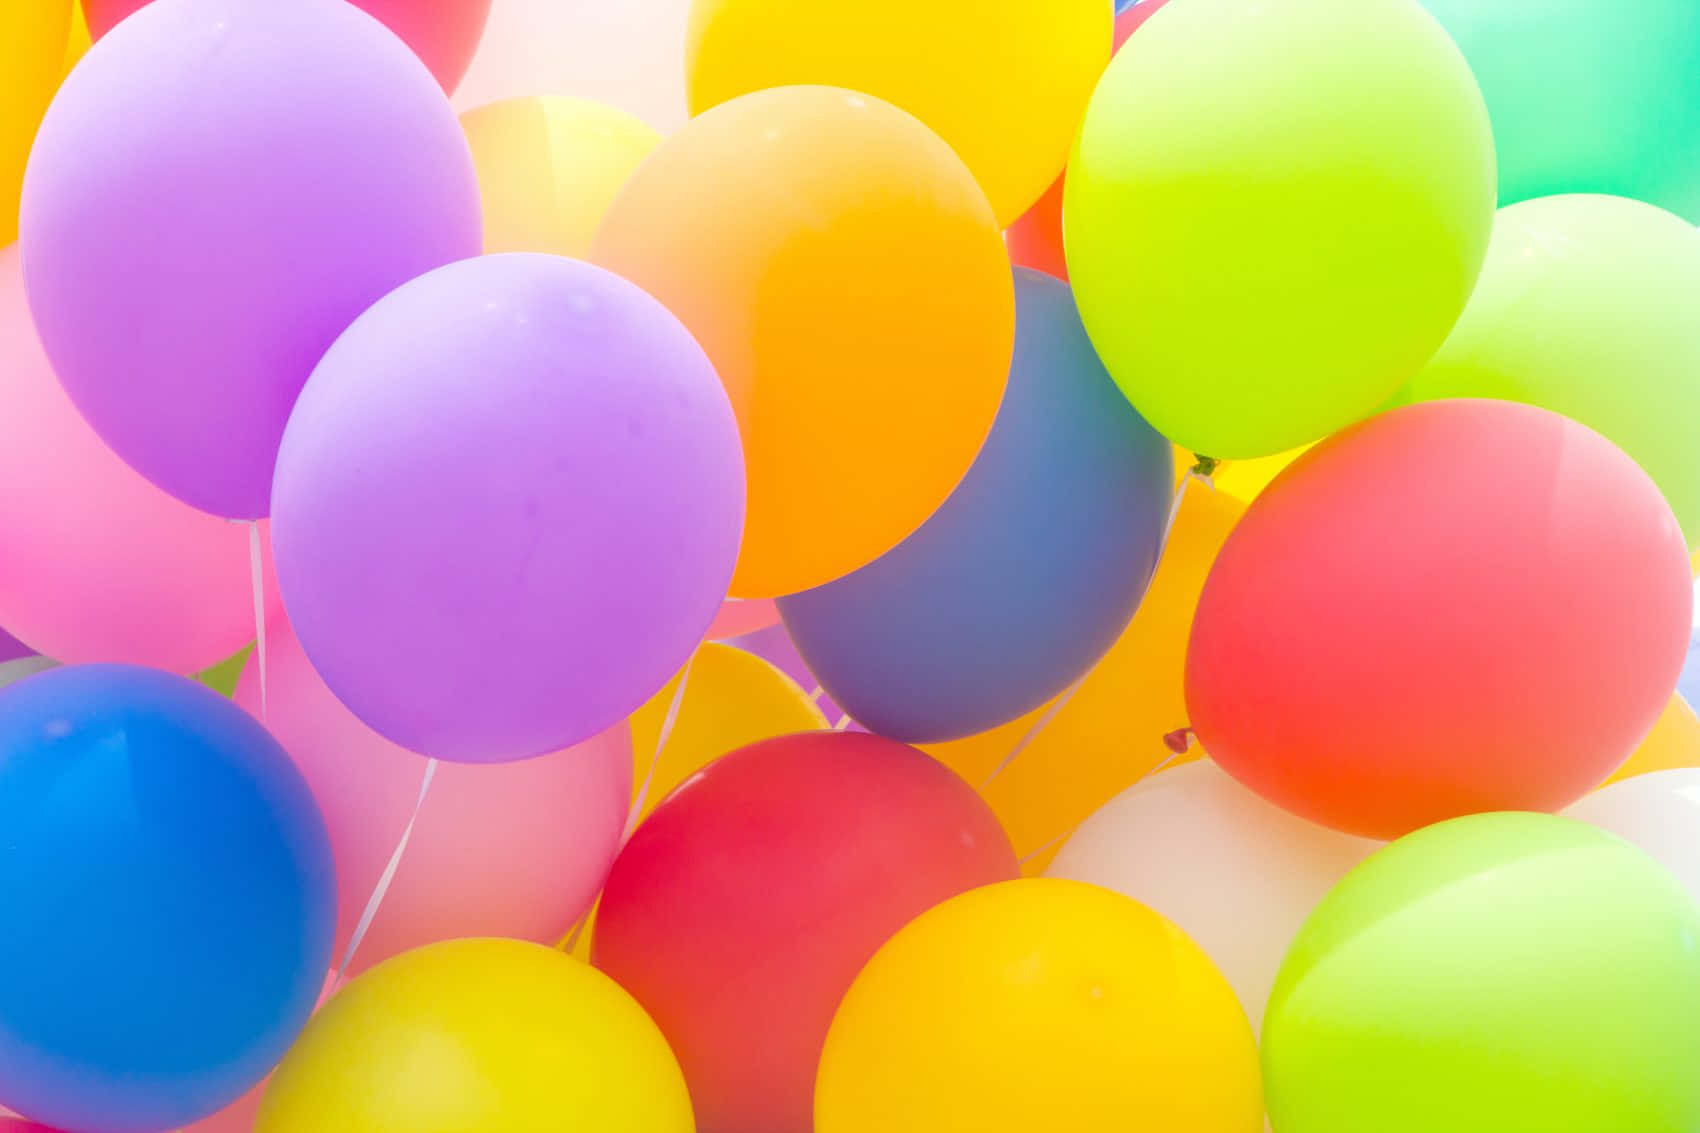 Colorful Balloons Are Floating In The Air